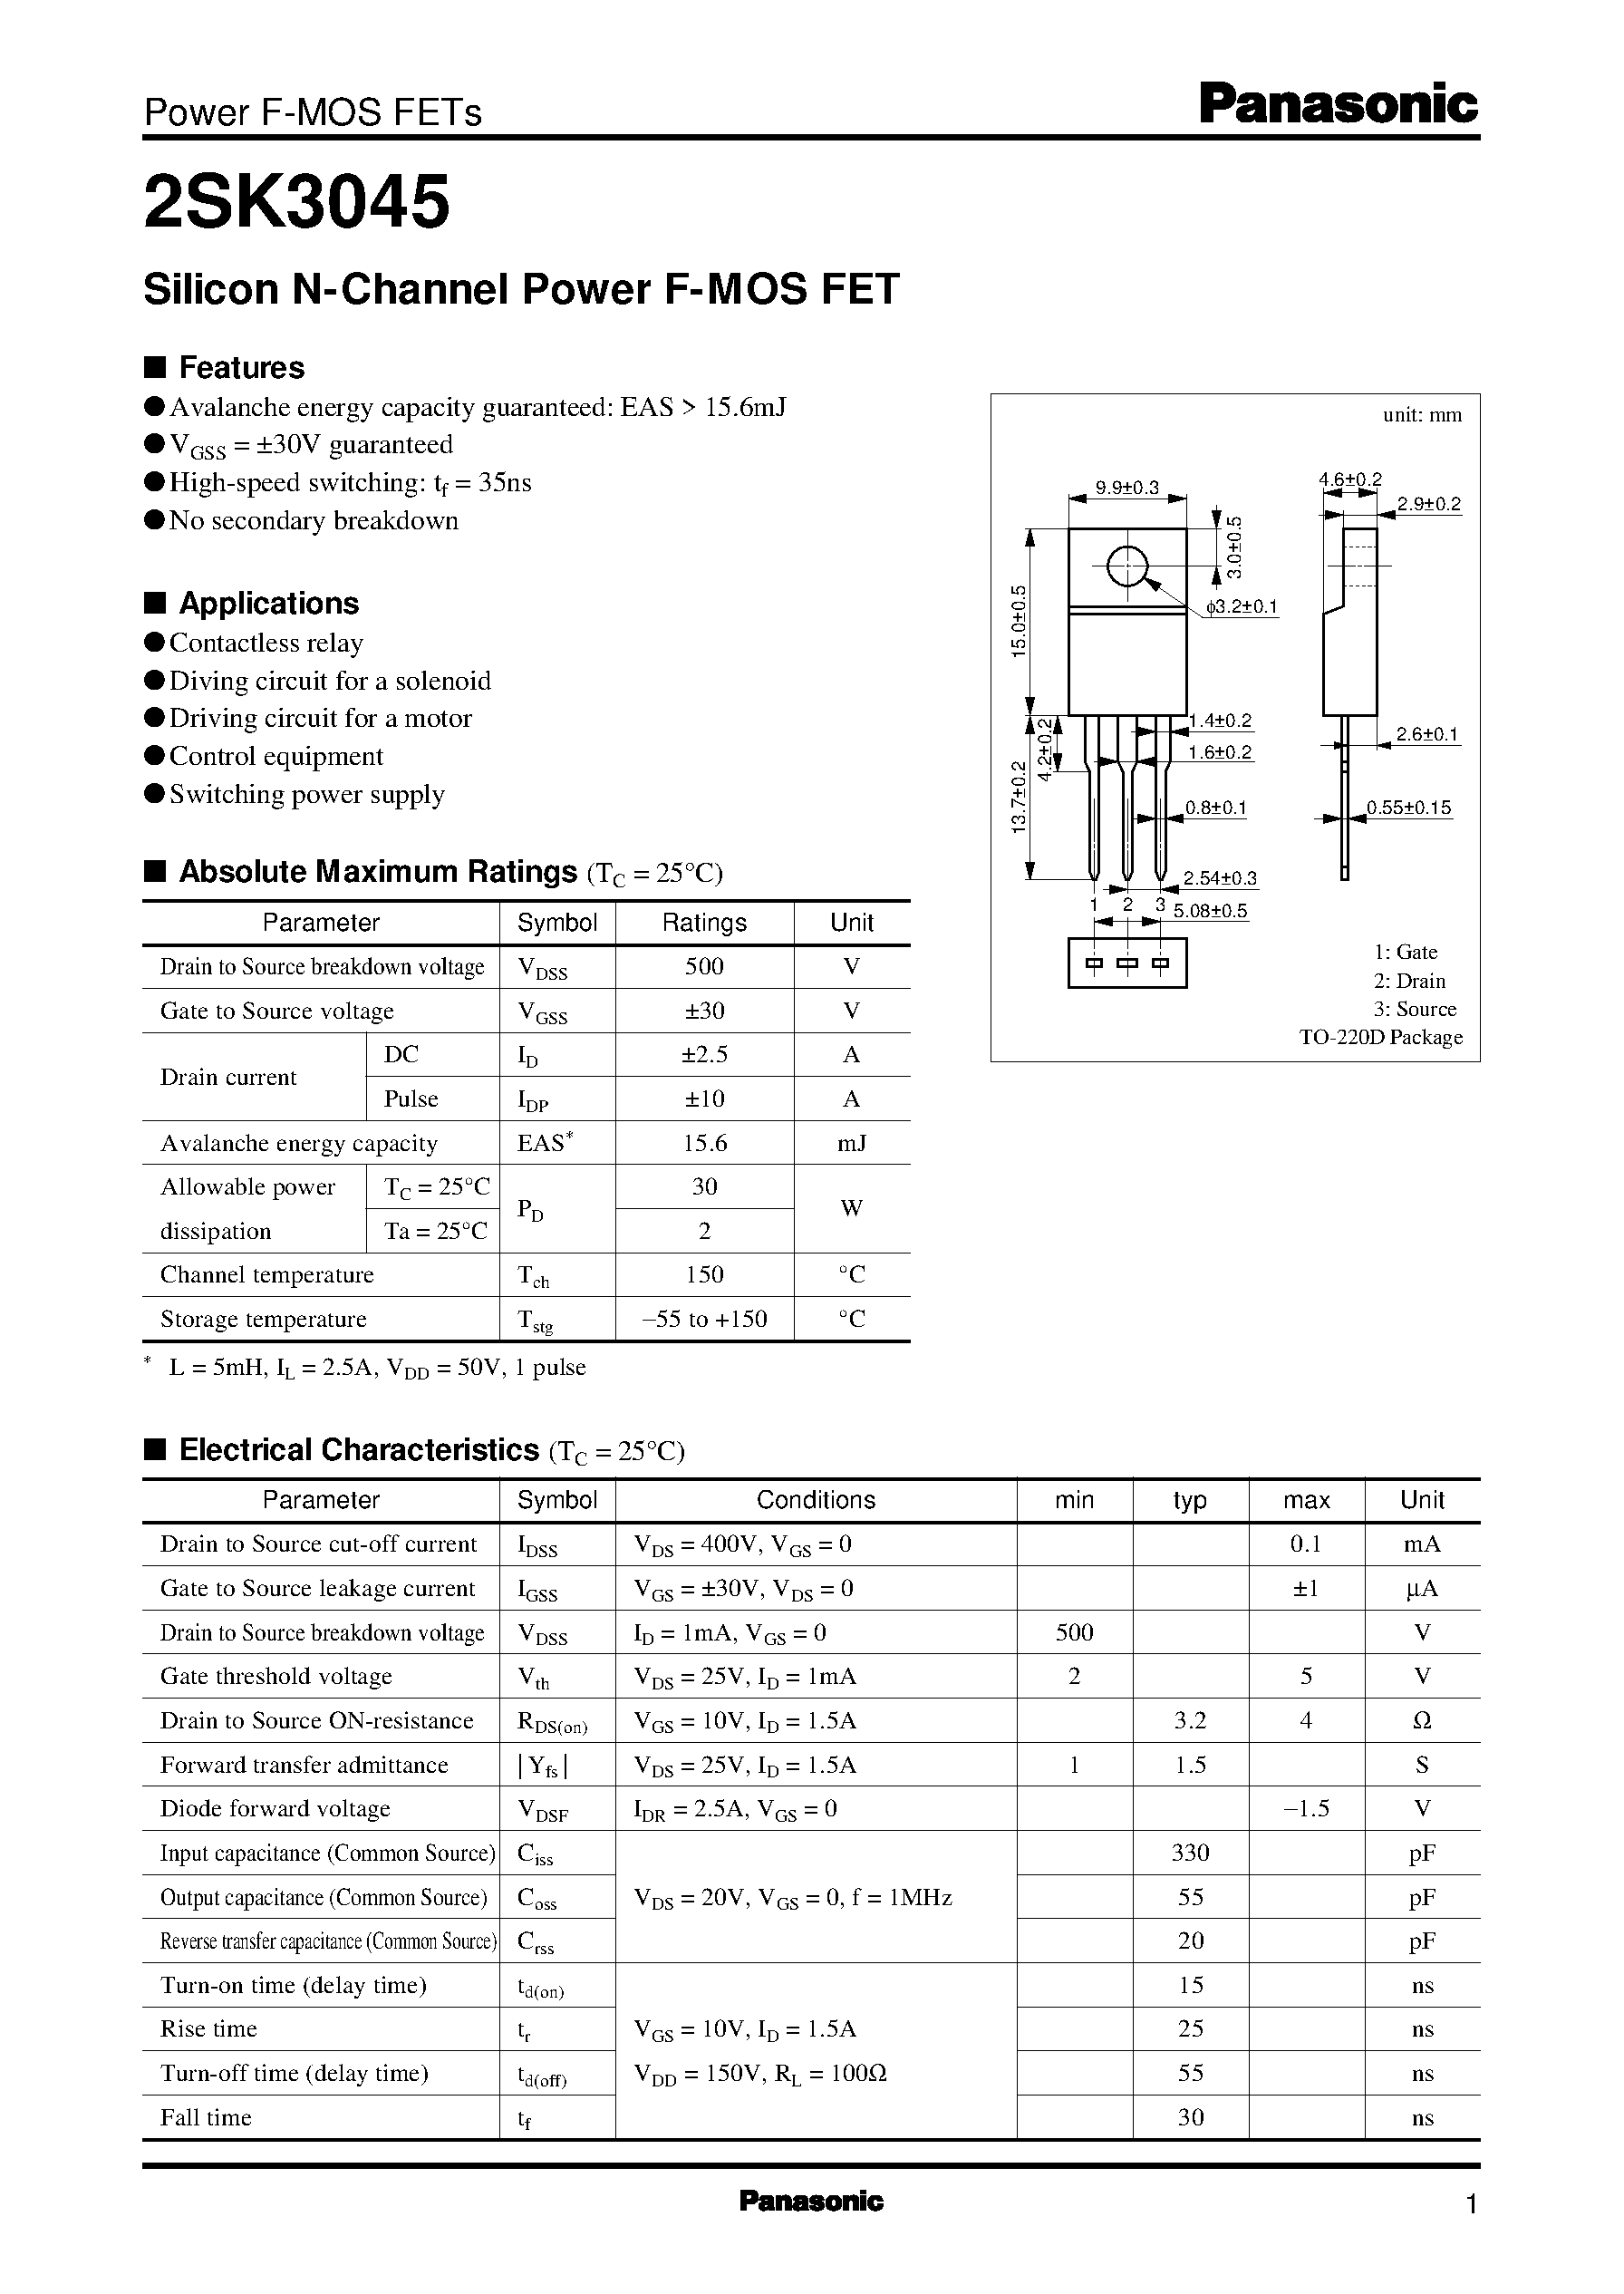 Datasheet 2SK3045 - Silicon N-Channel Power F-MOS FET page 1